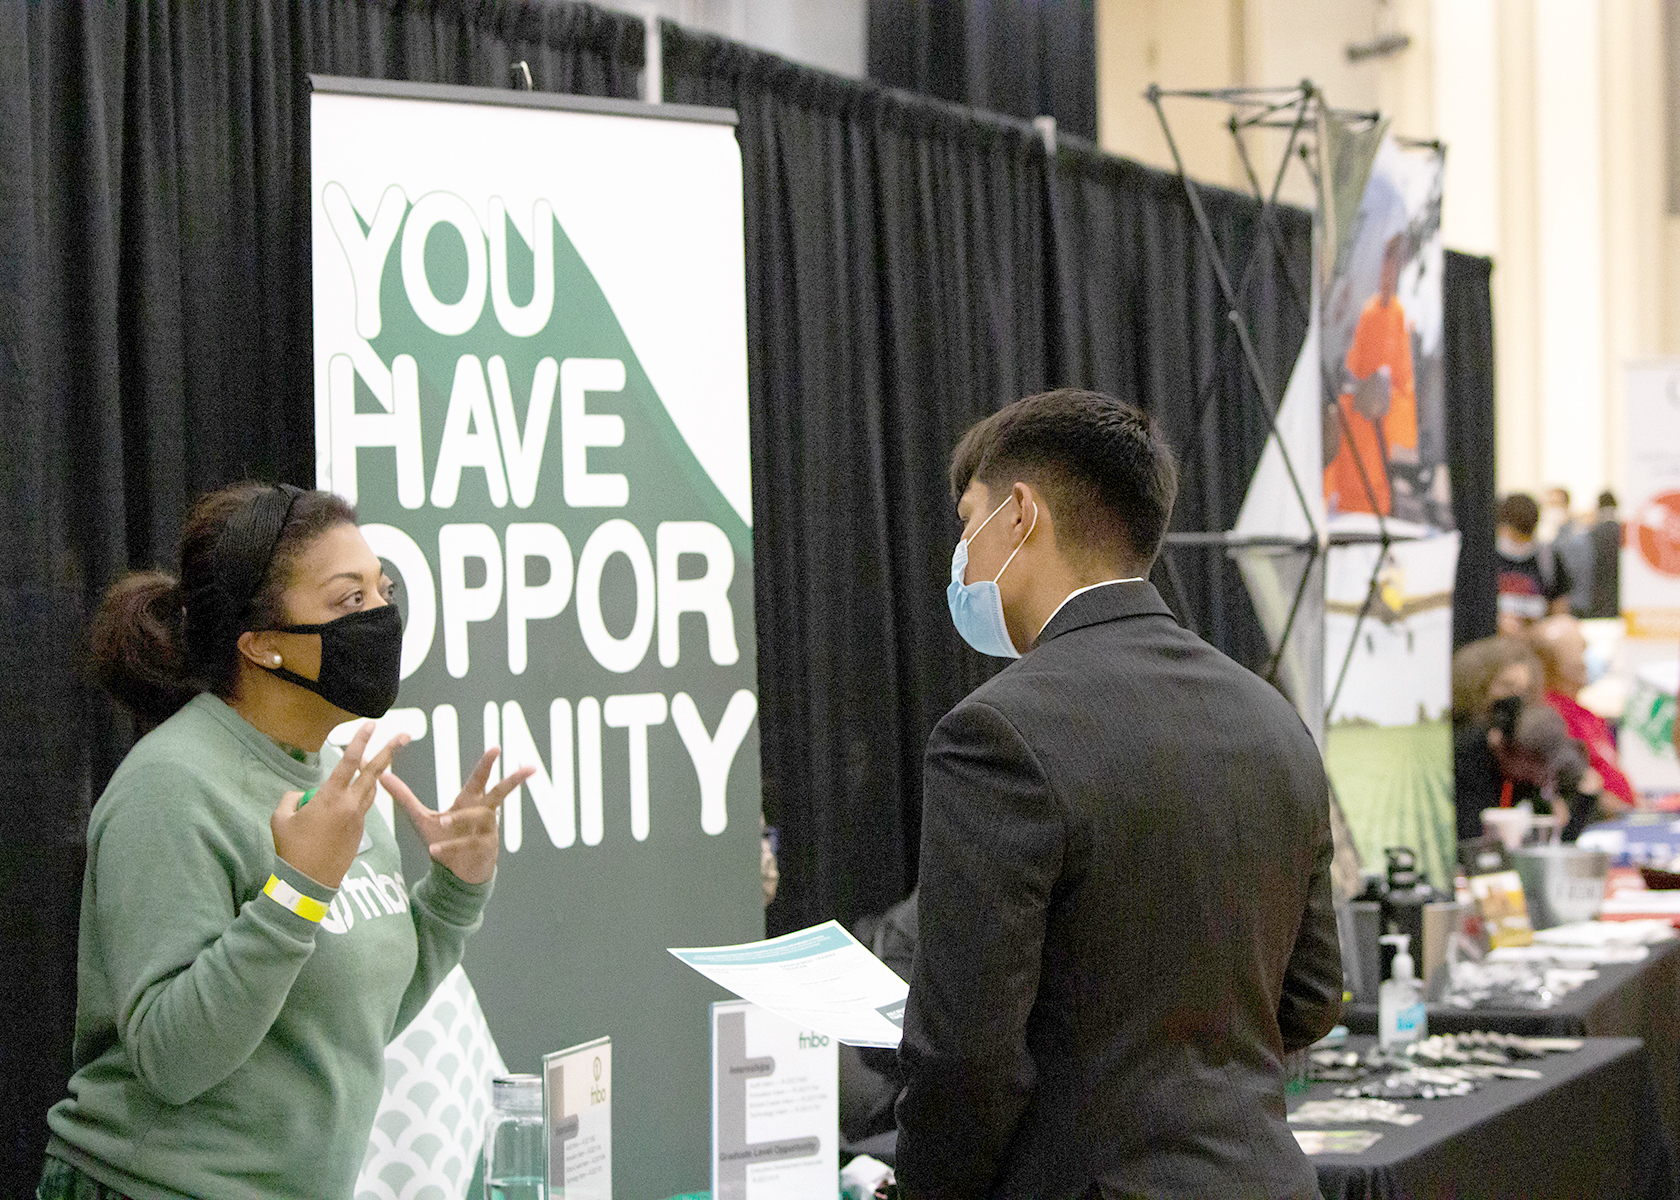 Faculty can help connect students to professional opportunities by encouraging them to participate in UNL's Career Fairs.